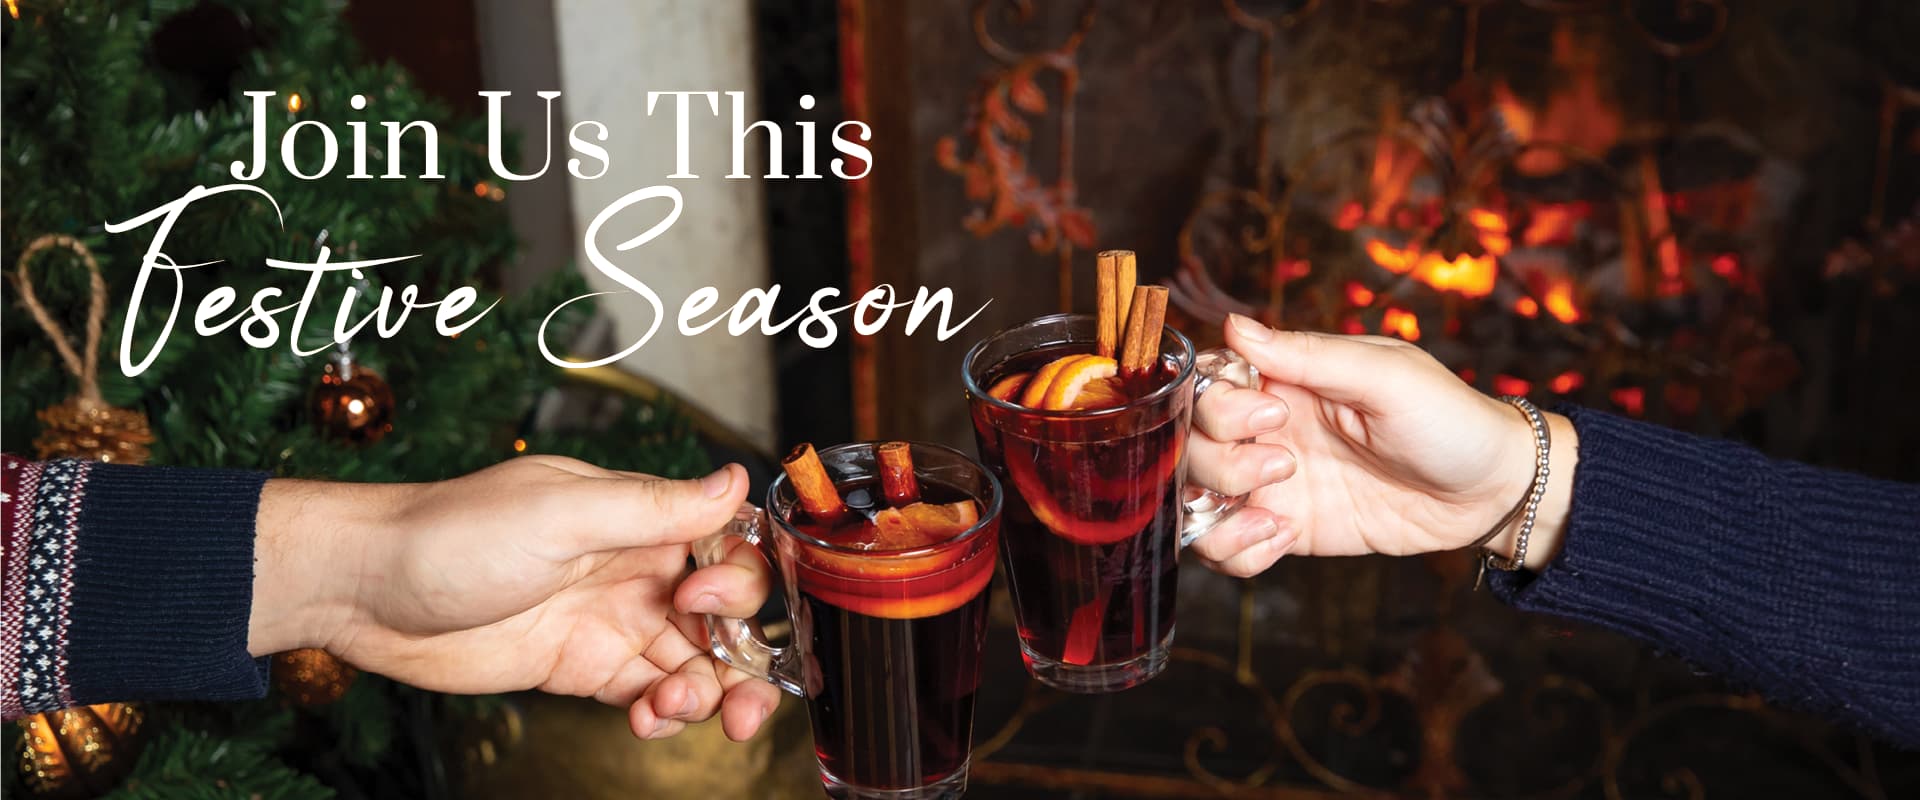 join us this festive season at The Coach House | Mulled Wine